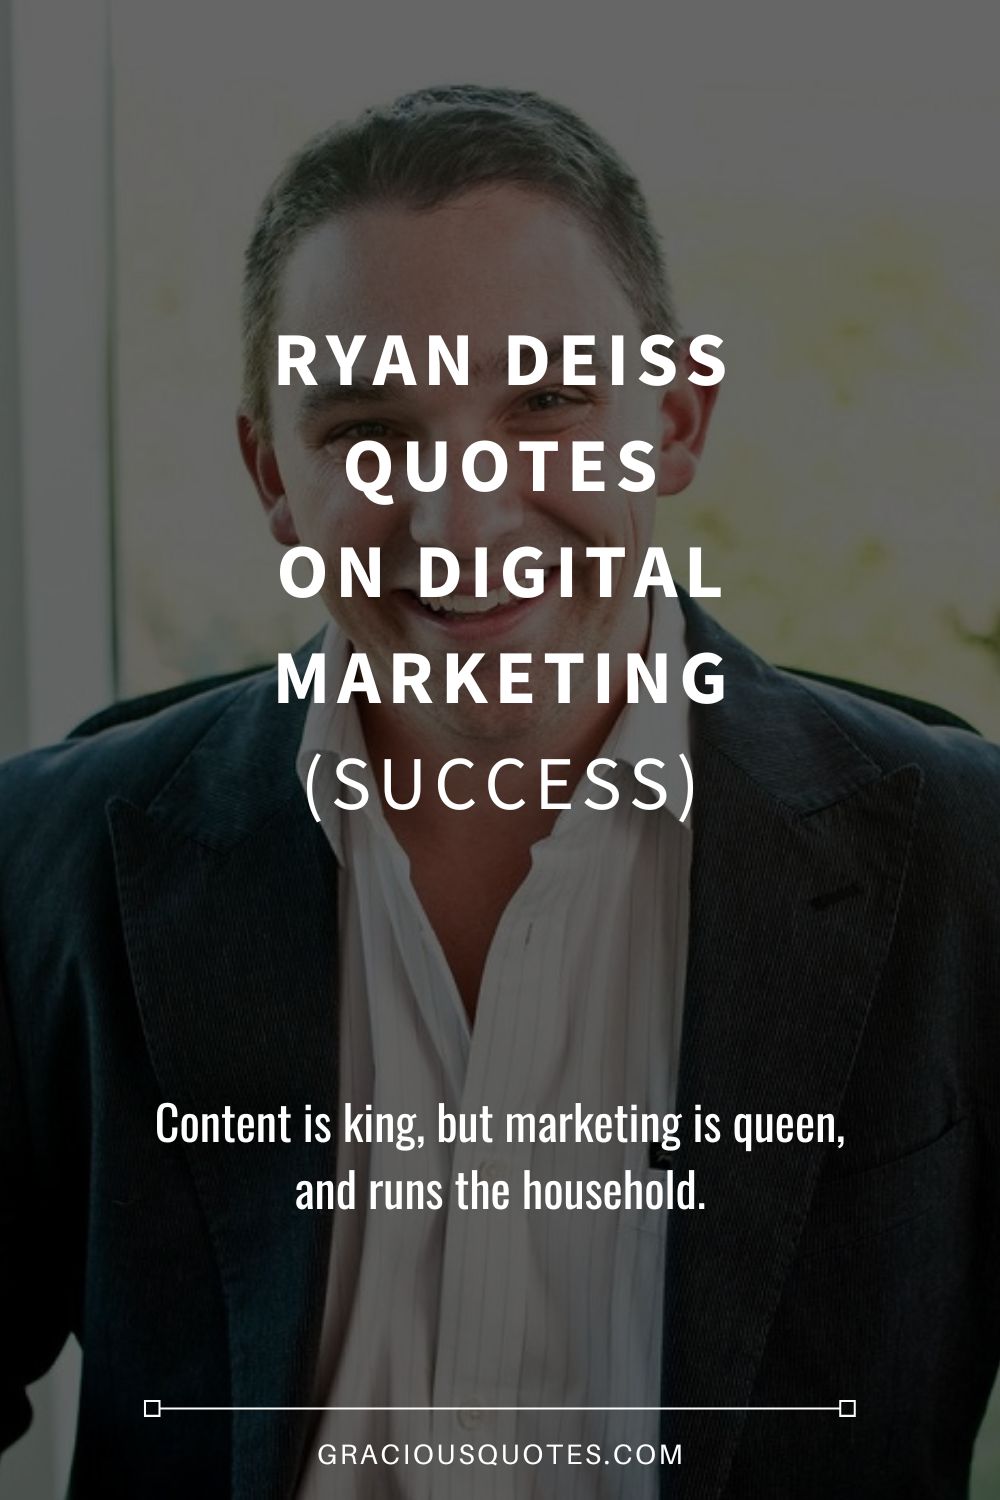 Ryan Deiss Quotes on Digital Marketing (SUCCESS) - Gracious Quotes